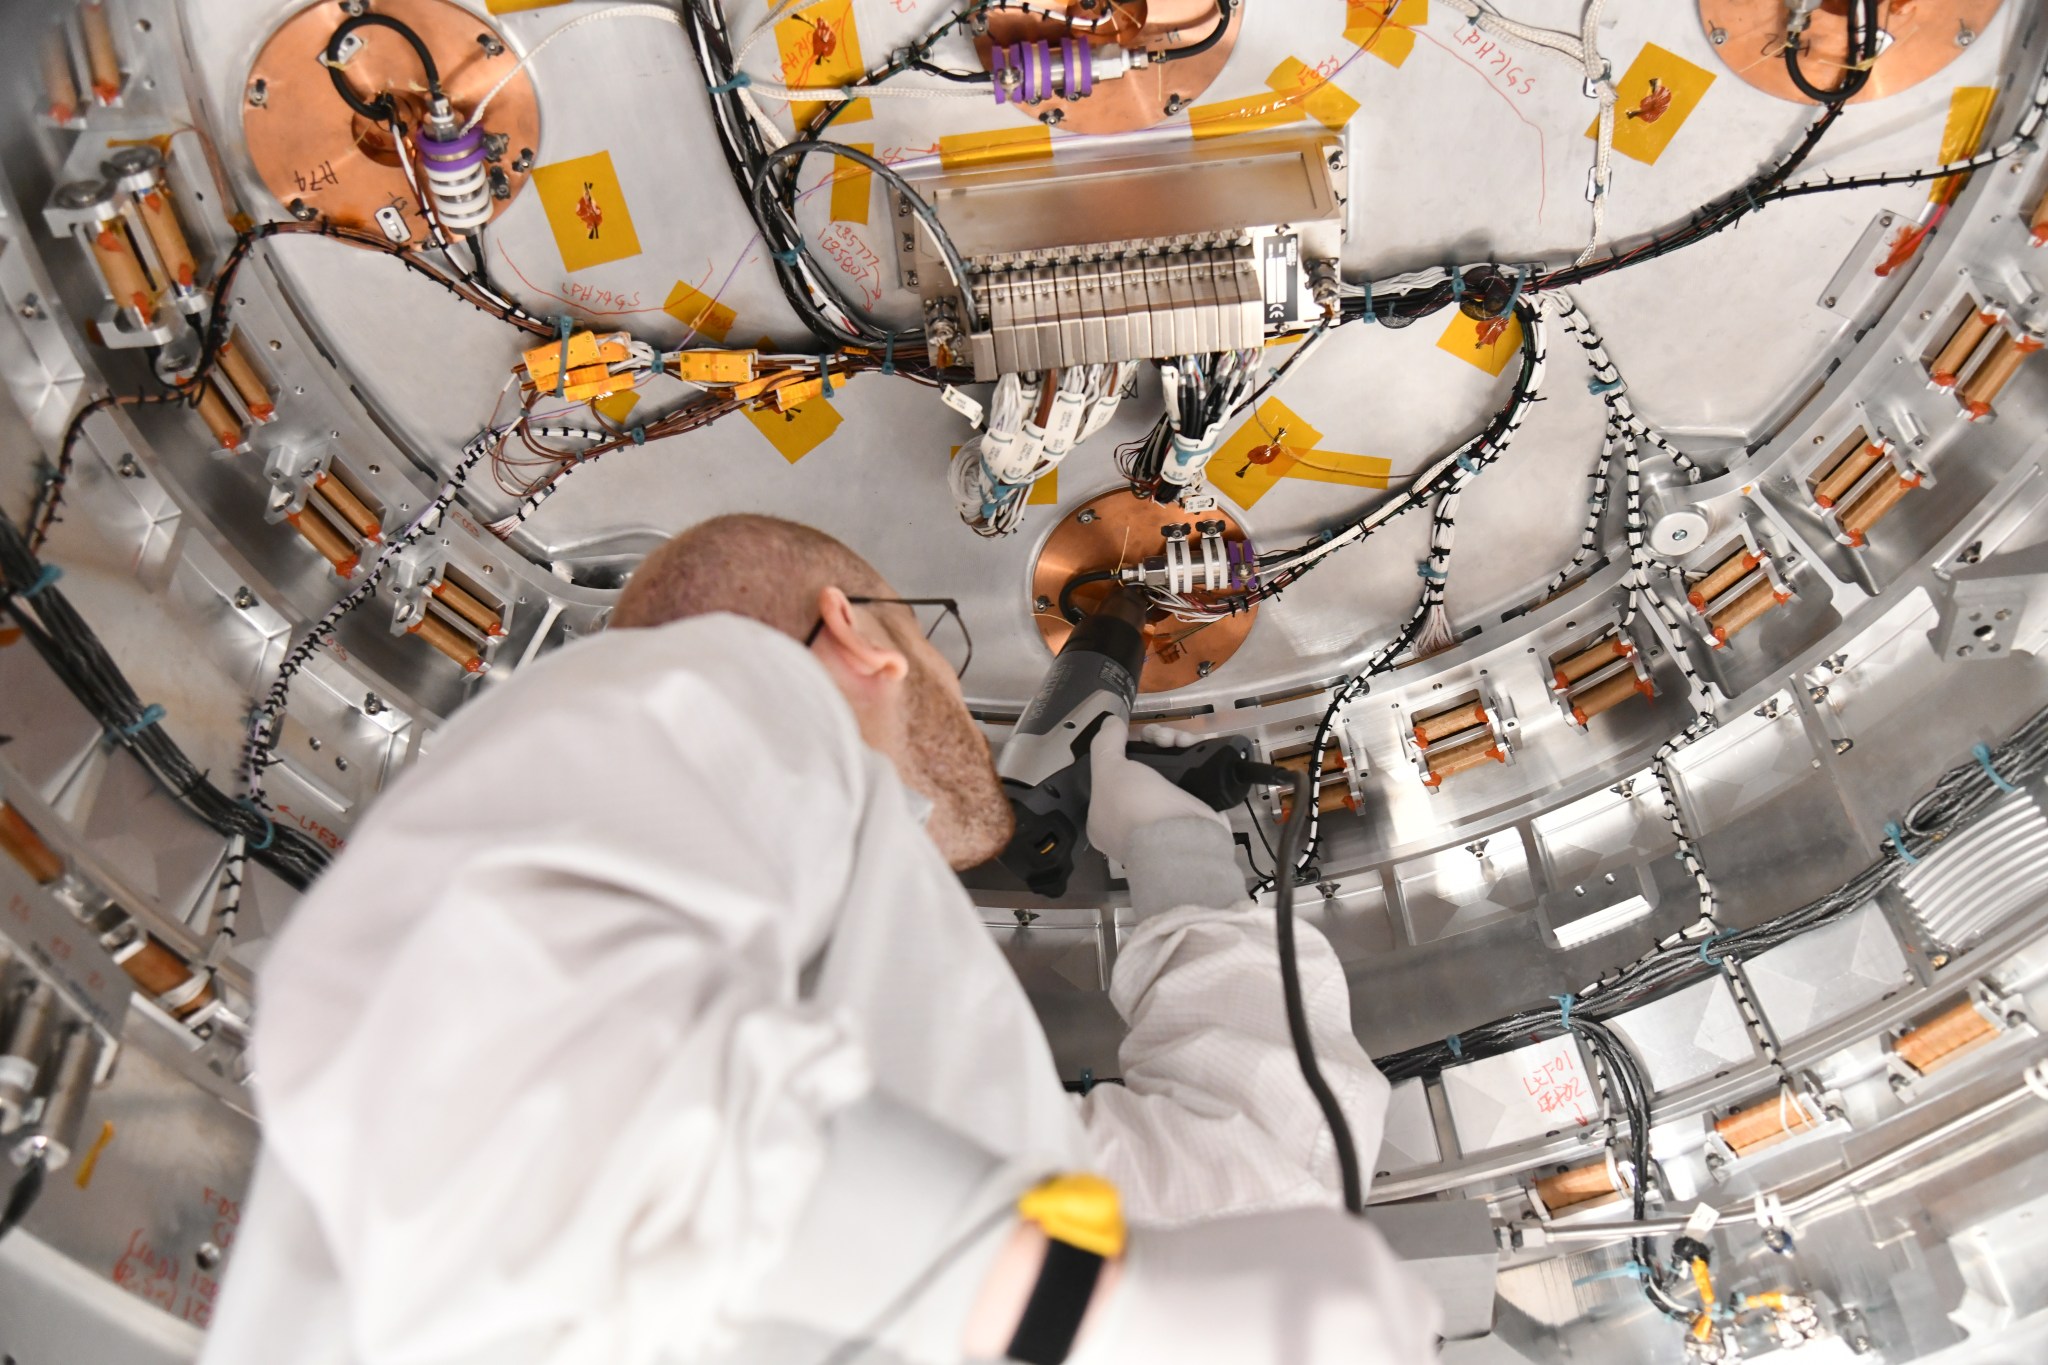 Seen from below, a person wearing a white lab coat is holding an instrument toward a panel of curving wires and technical panels.